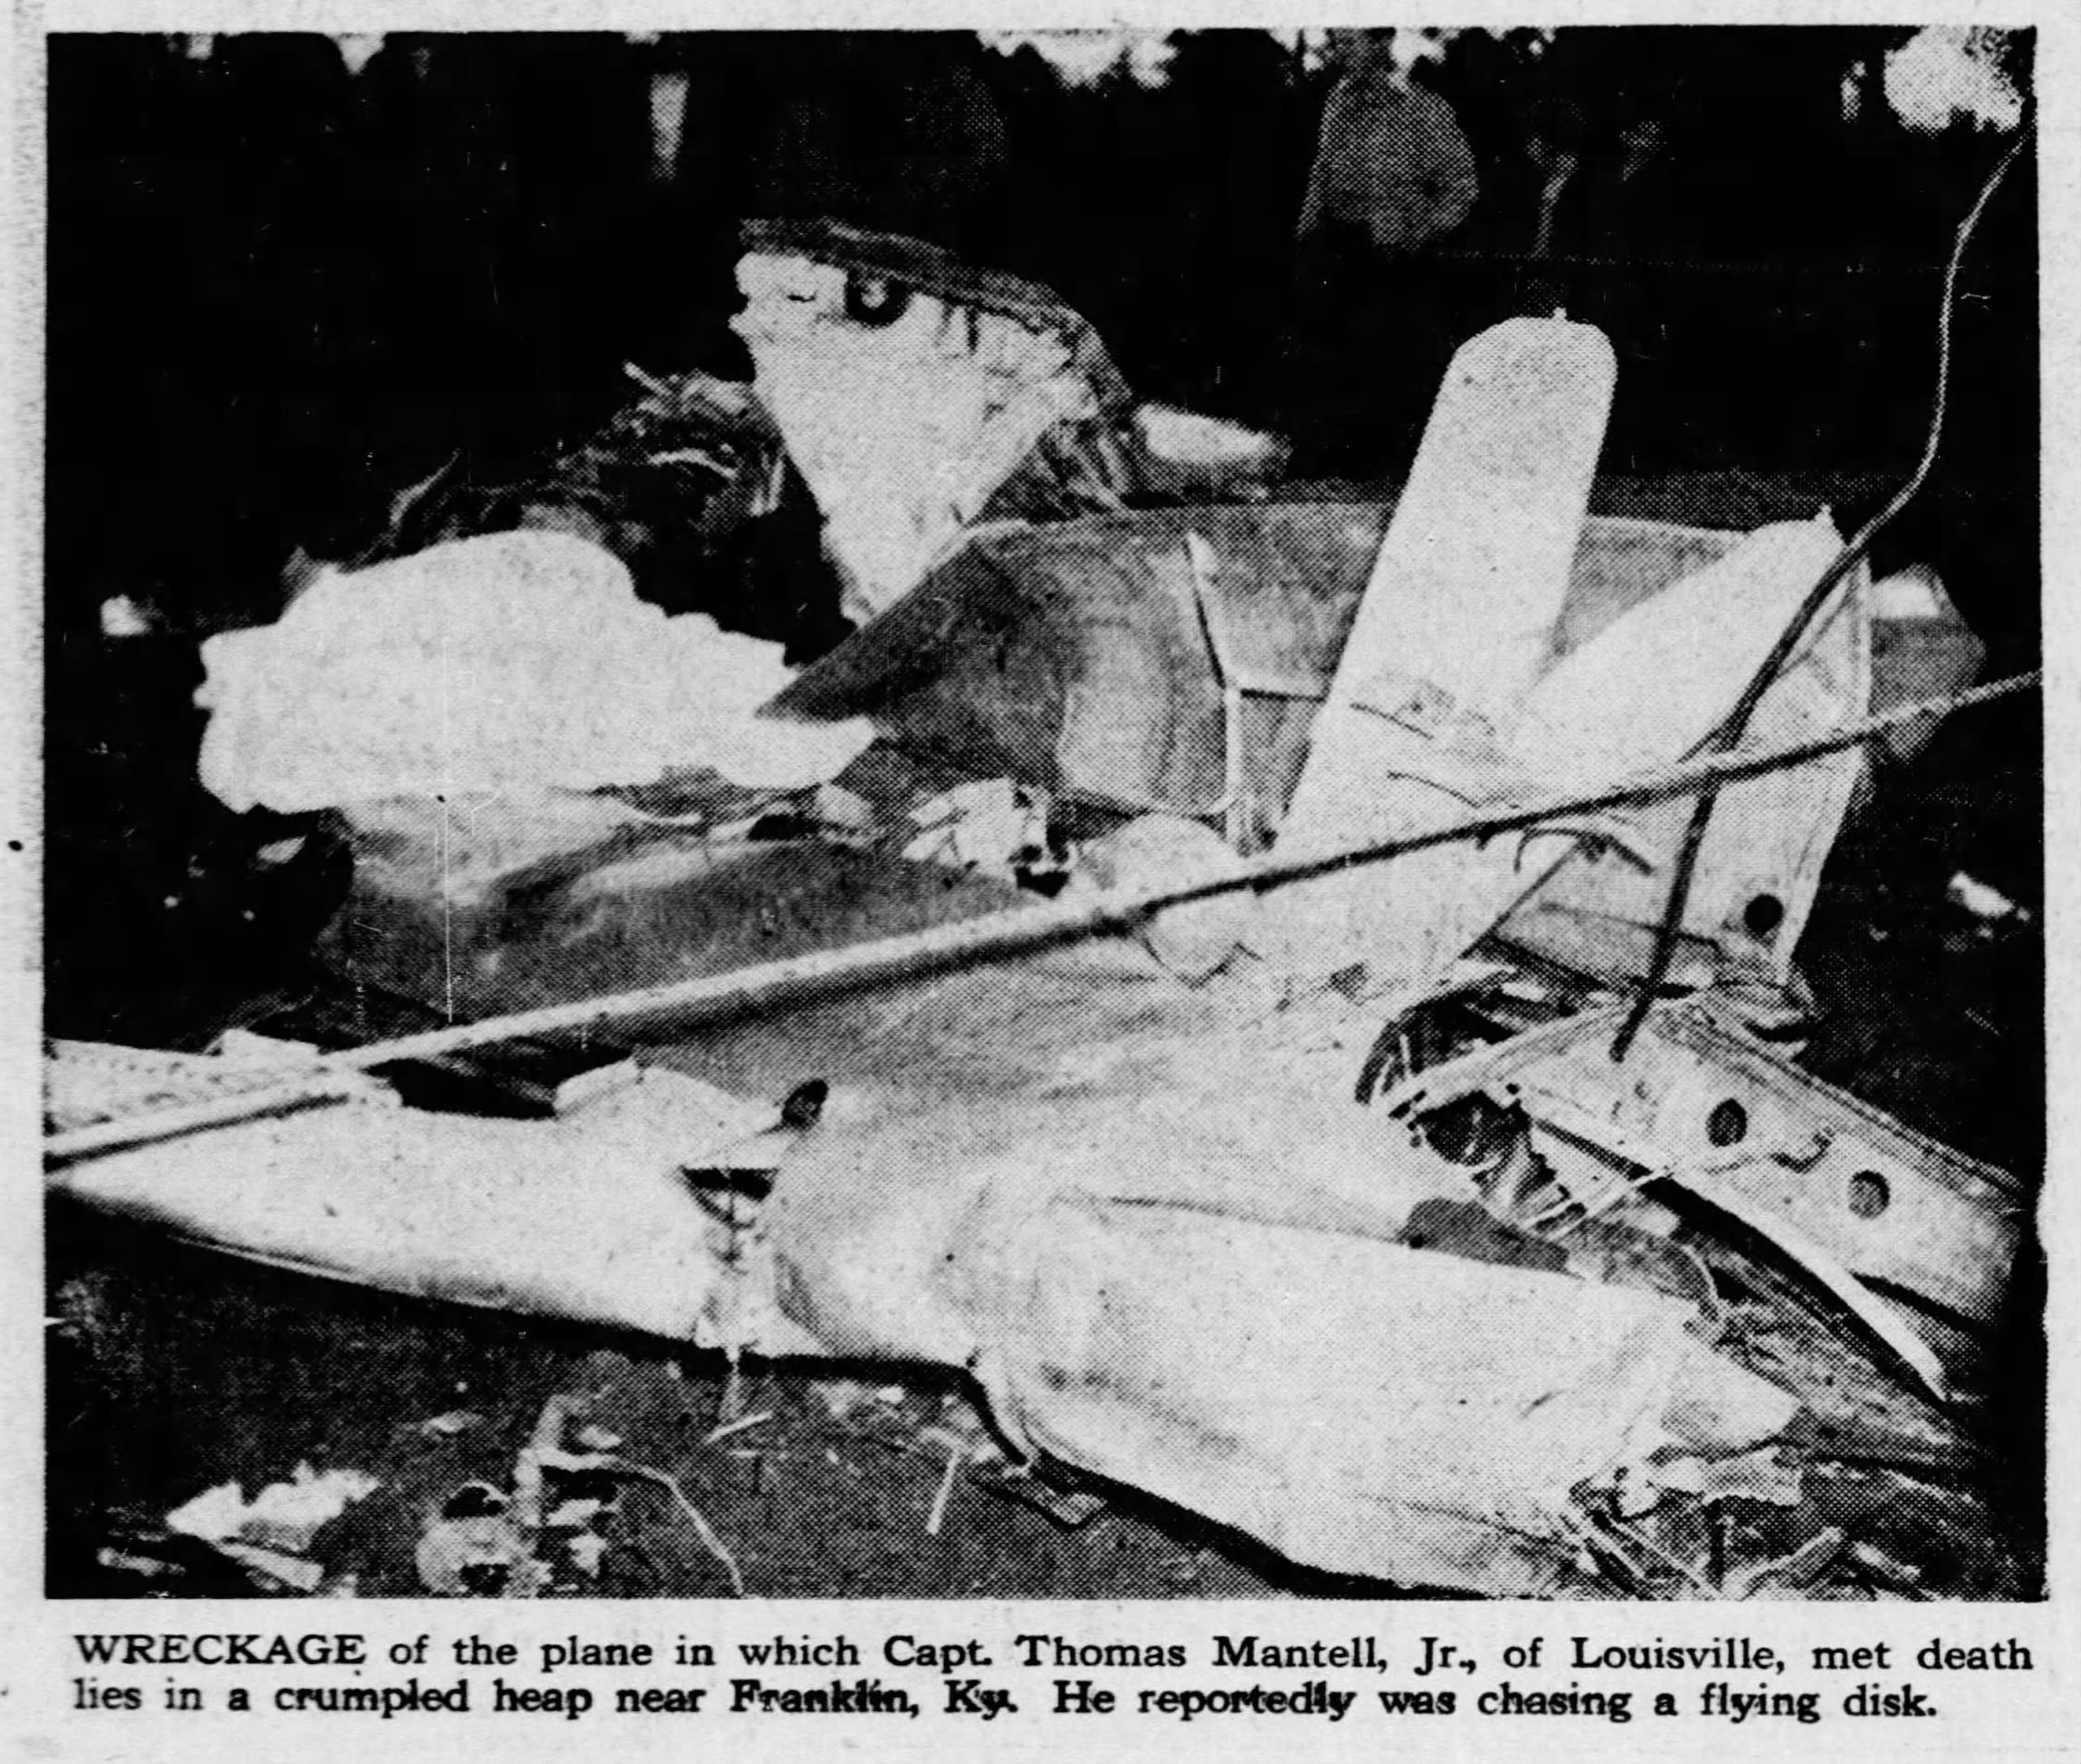 A Courier Journal archive photo depicts wreckage of the plane in which Capt. Thomas Mantell crashed and died. Jan. 9, 1948